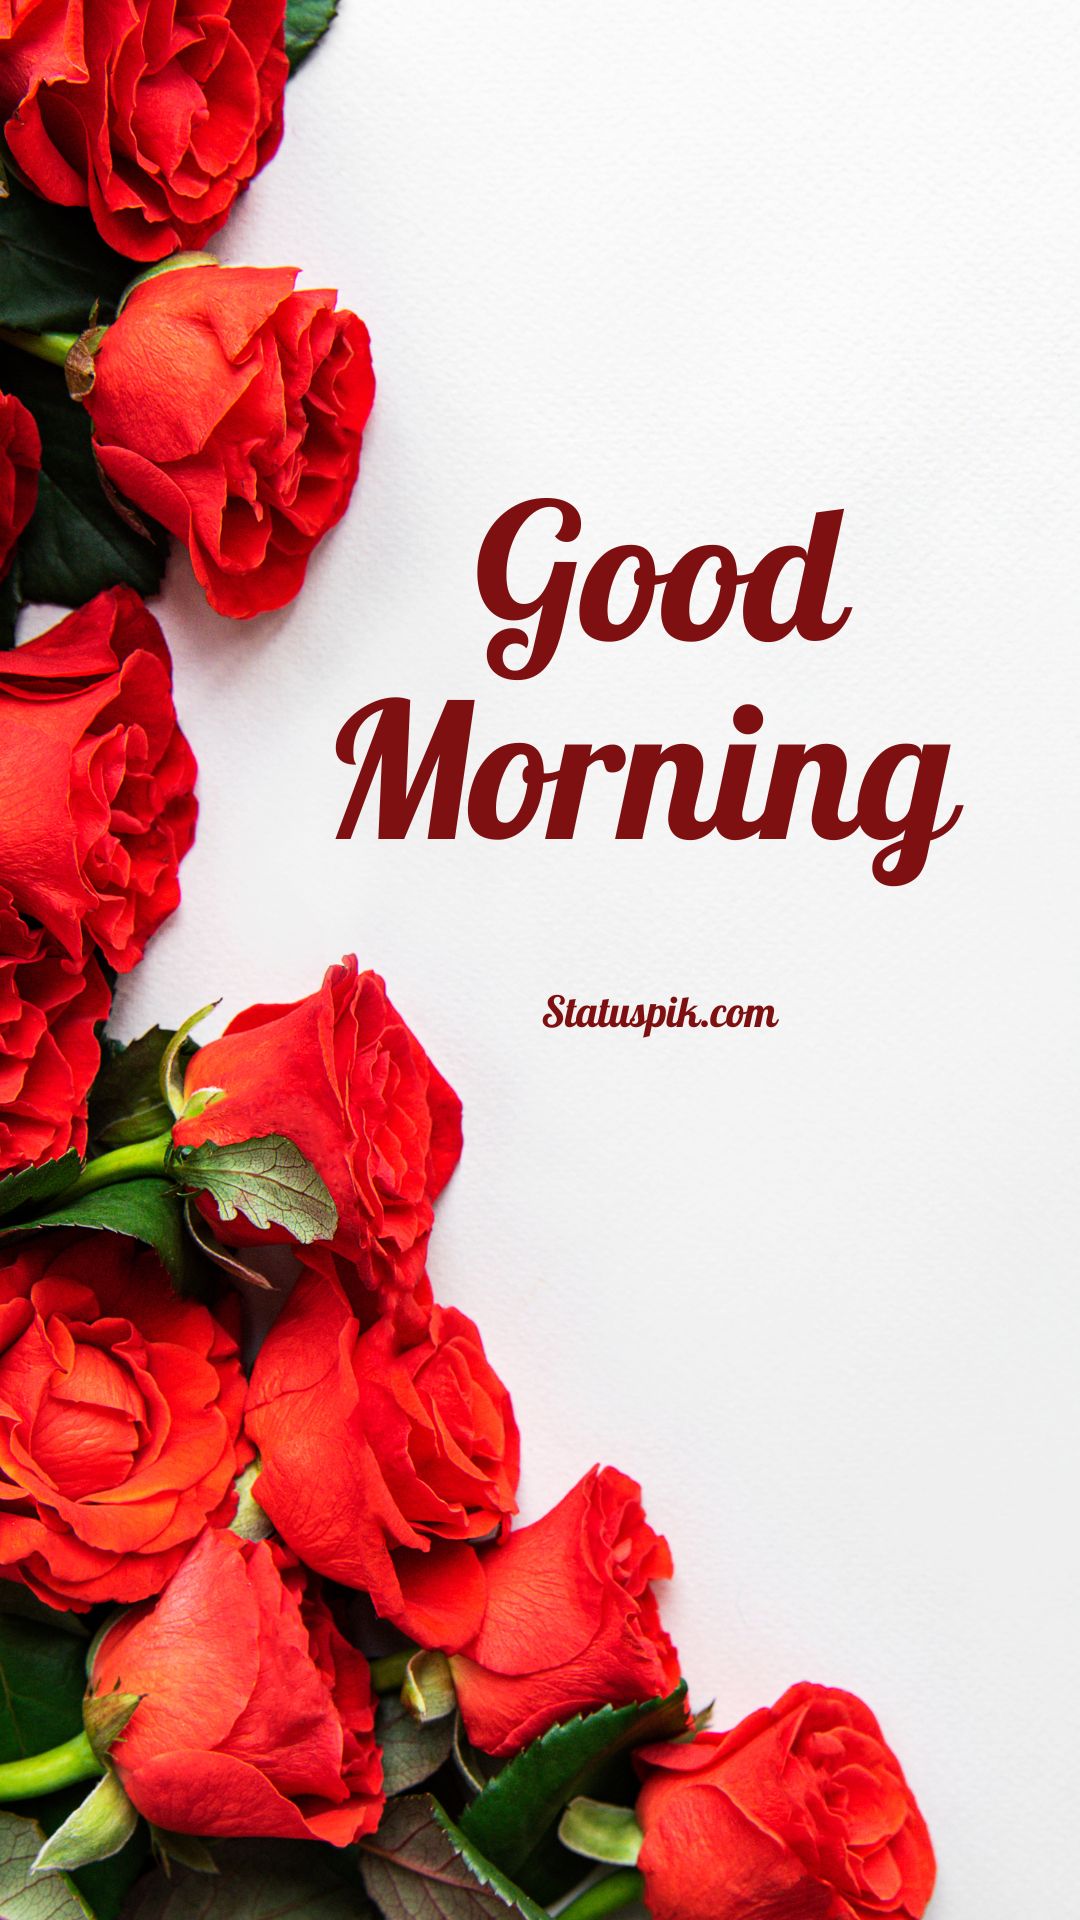 Good Morning Red Rose Images